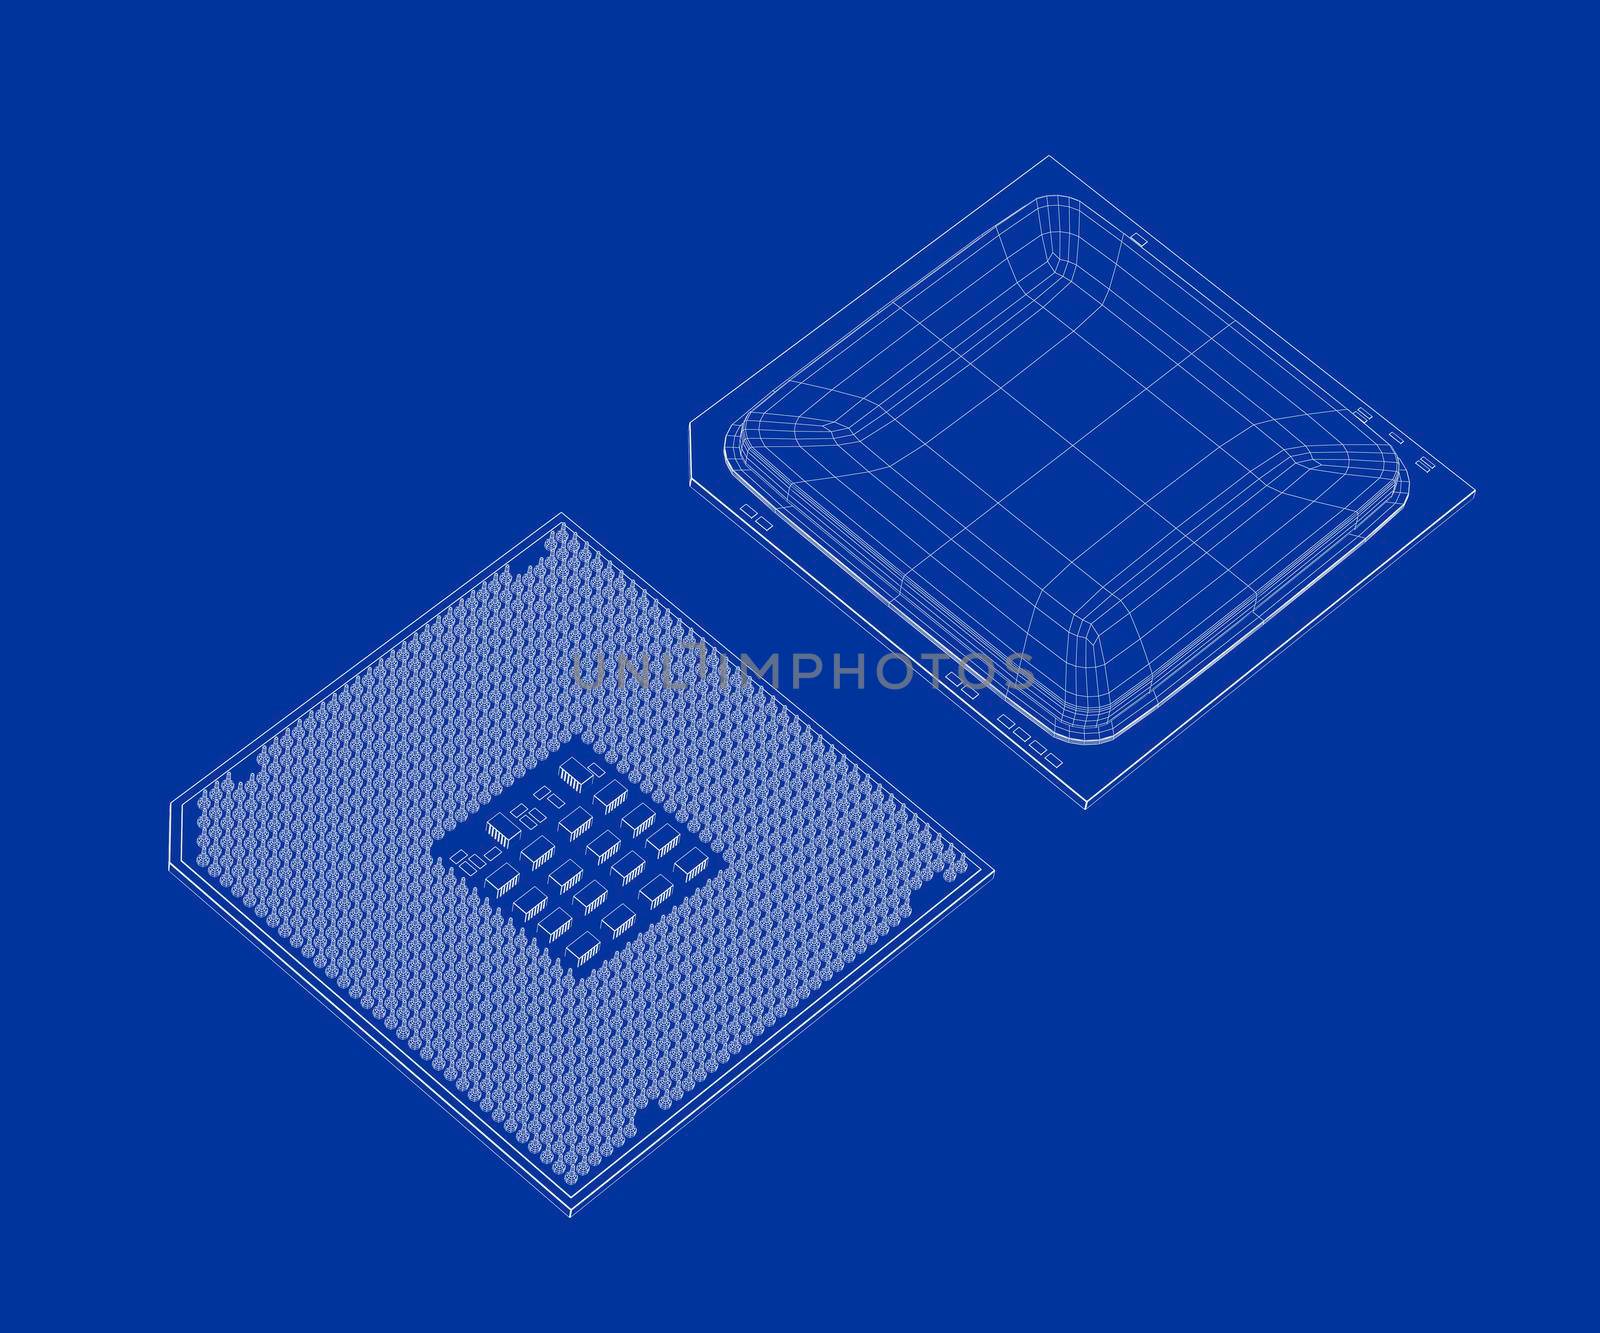 3D designs of computer processors by magraphics